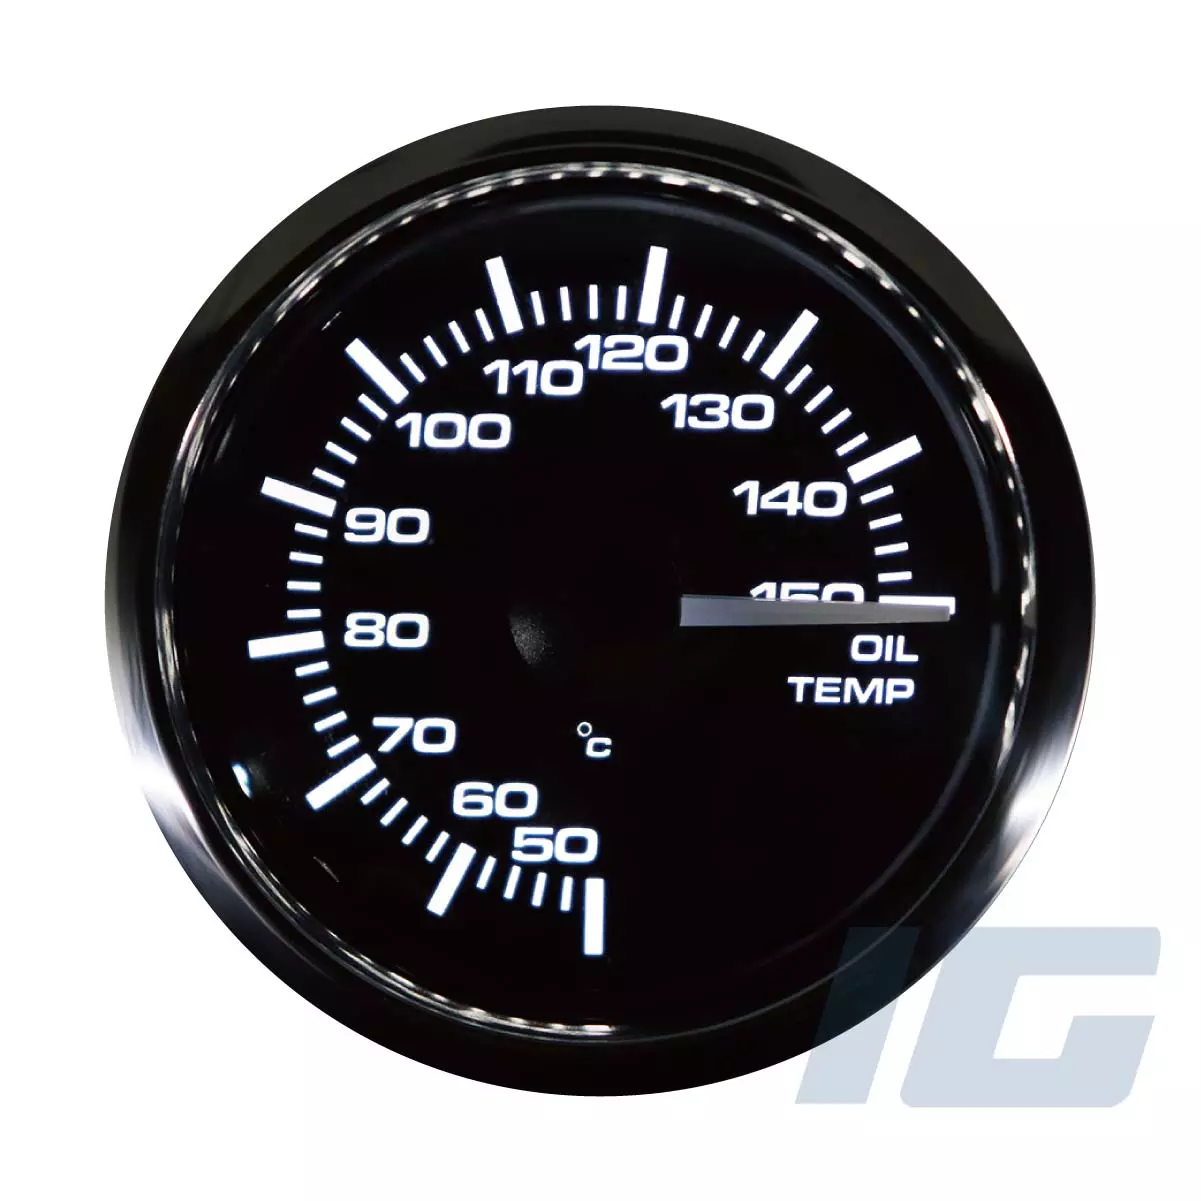 MGS, Series, 52mm, Black Face, Aftermarket, Marine, Gauge, Boat, Outboard, Oil Temperature